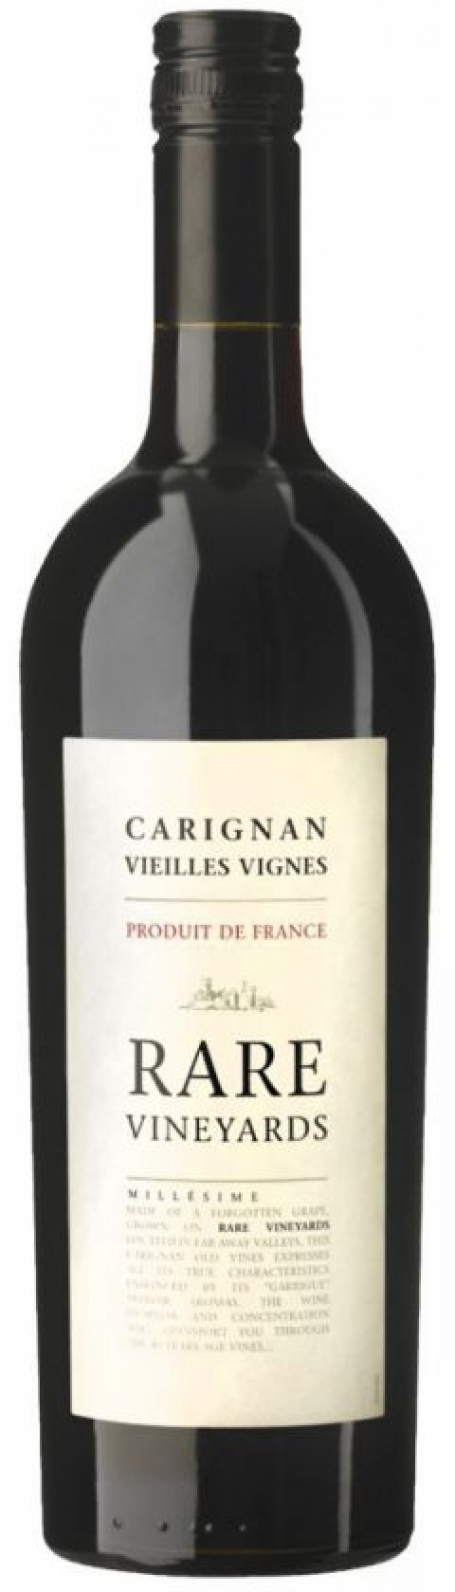 images/productimages/small/rare-carignan.jpg